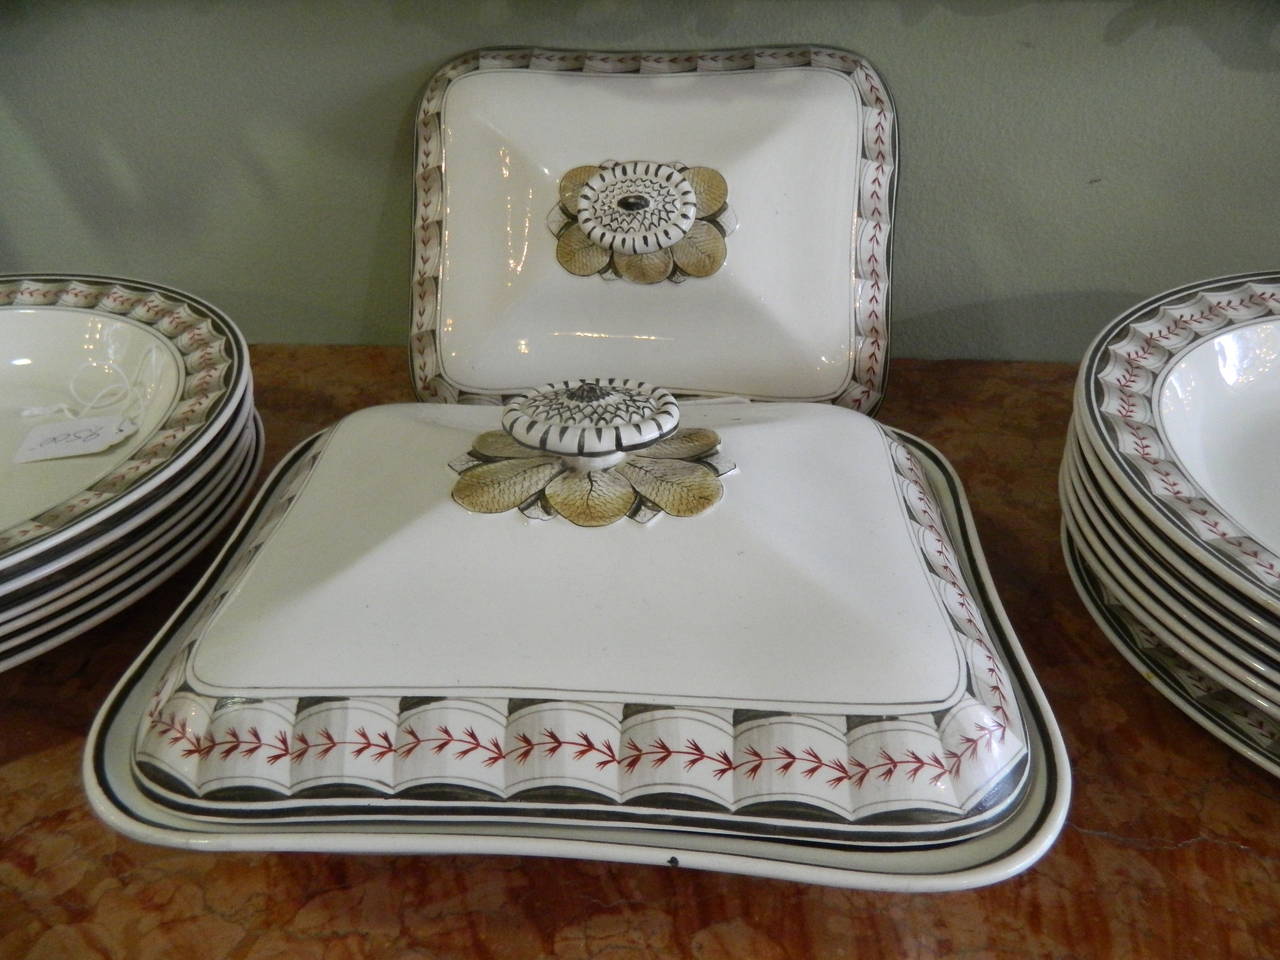 Partial dinner service of Wedgwood creamware in the lag and feather pattern
in sepia and red accents, circa 1800.
This group has 26 pieces including: 12 soup plates 9.5